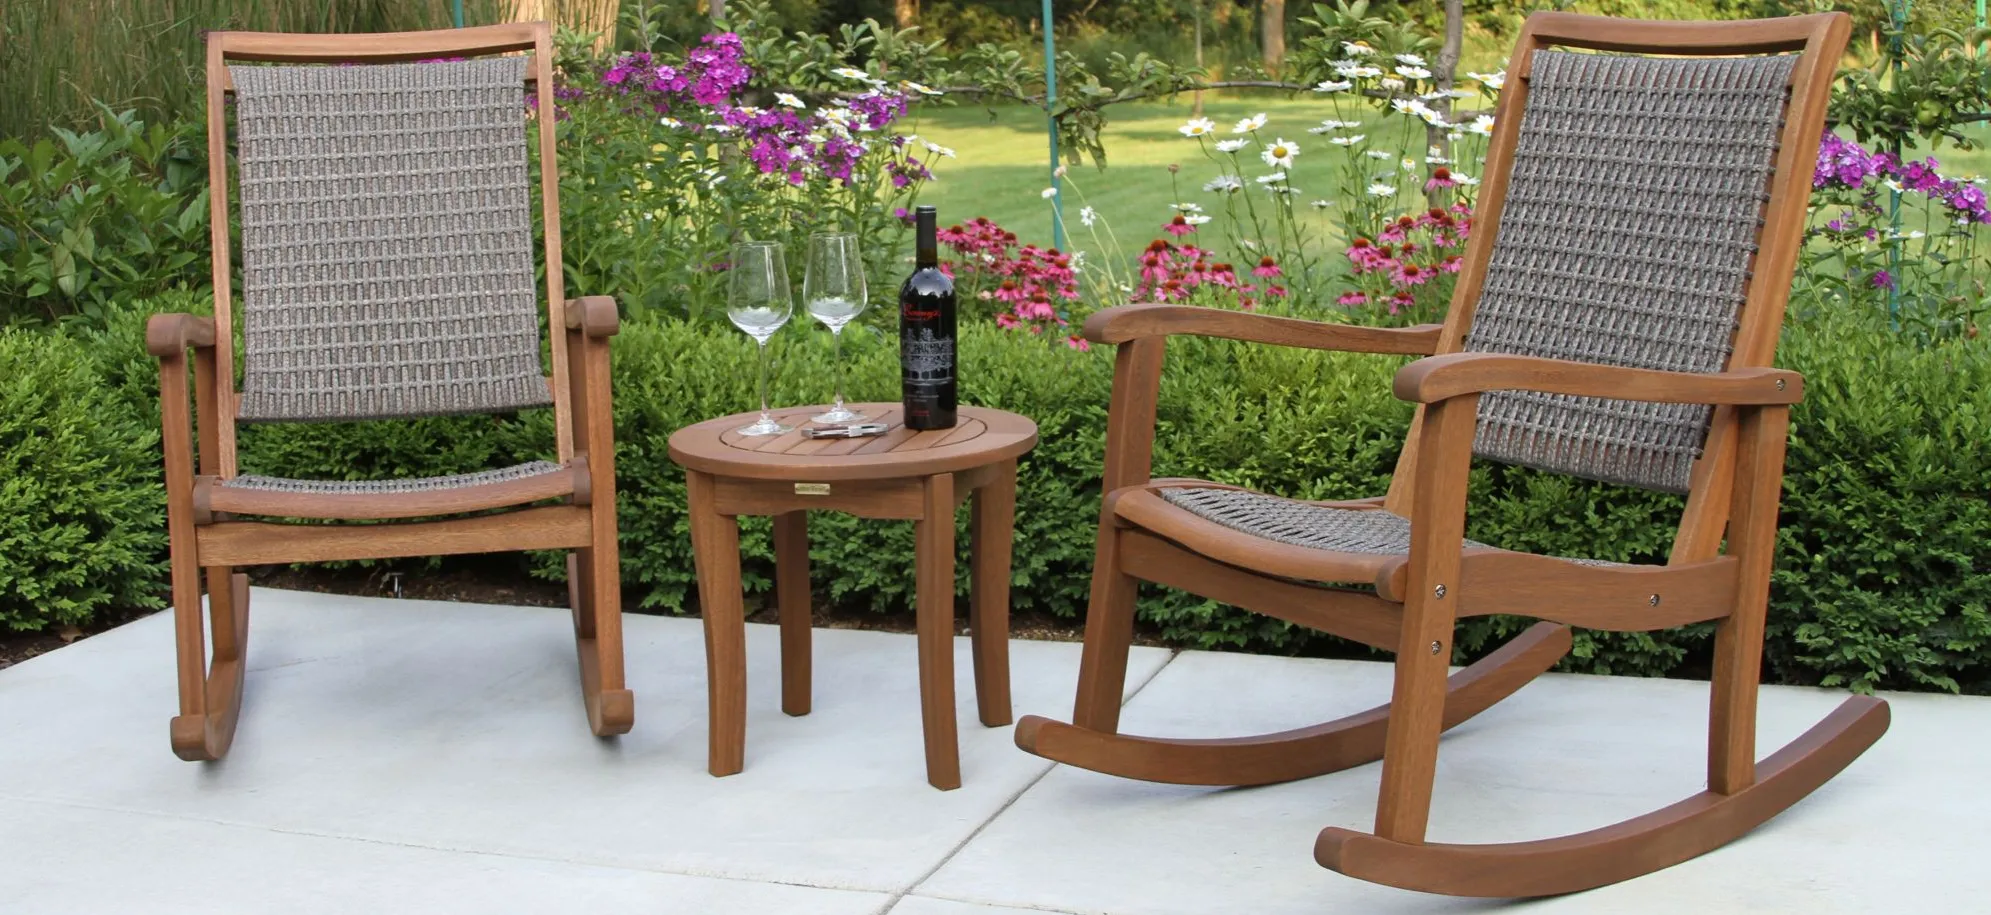 Ocean Ave 3-pc... Outdoor Seating Set in Walnut by Outdoor Interiors